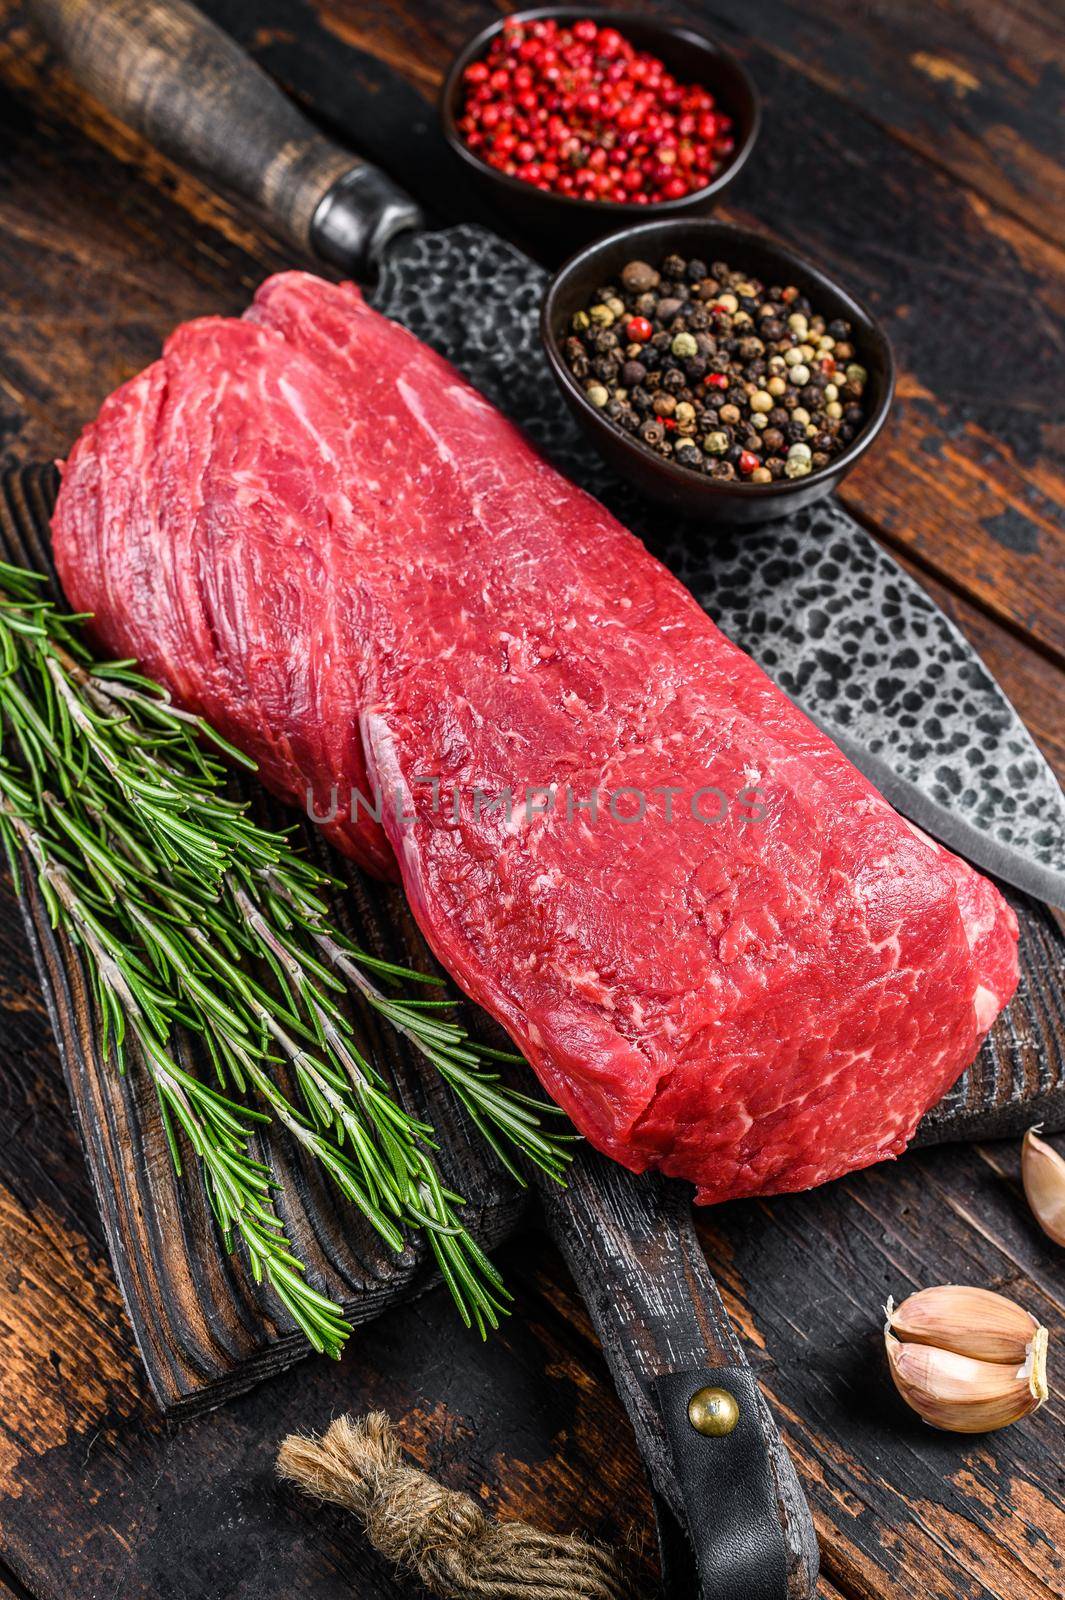 Whole Raw Tenderloin beef meat for steaks fillet mignon on a wooden cutting board with butcher knife. Dark wooden background. Top view.